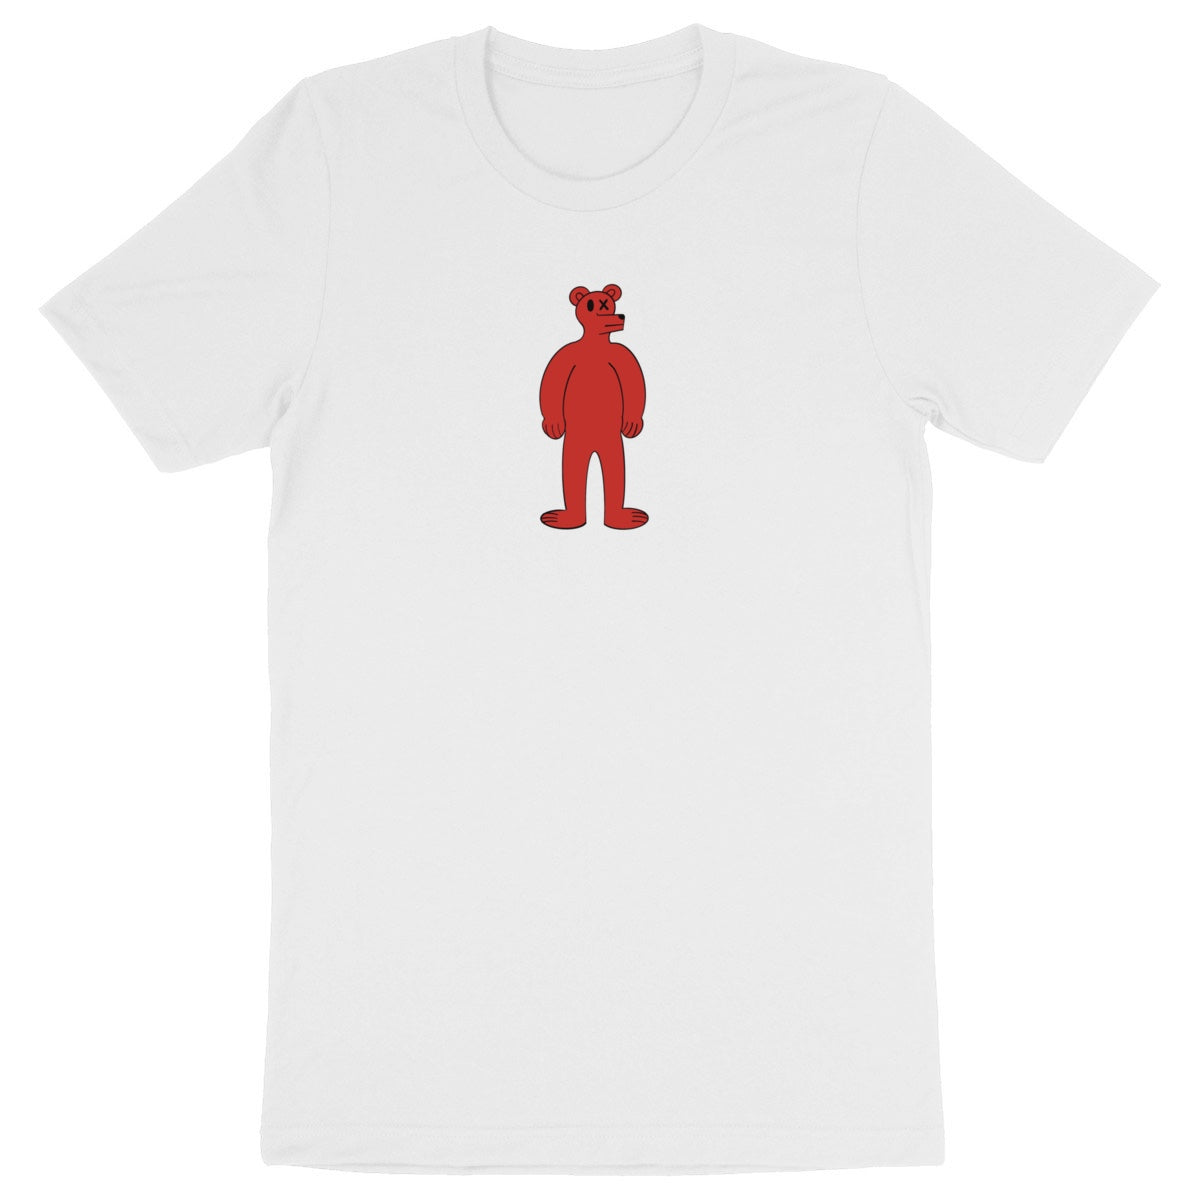 Red Bear Graphic Tee